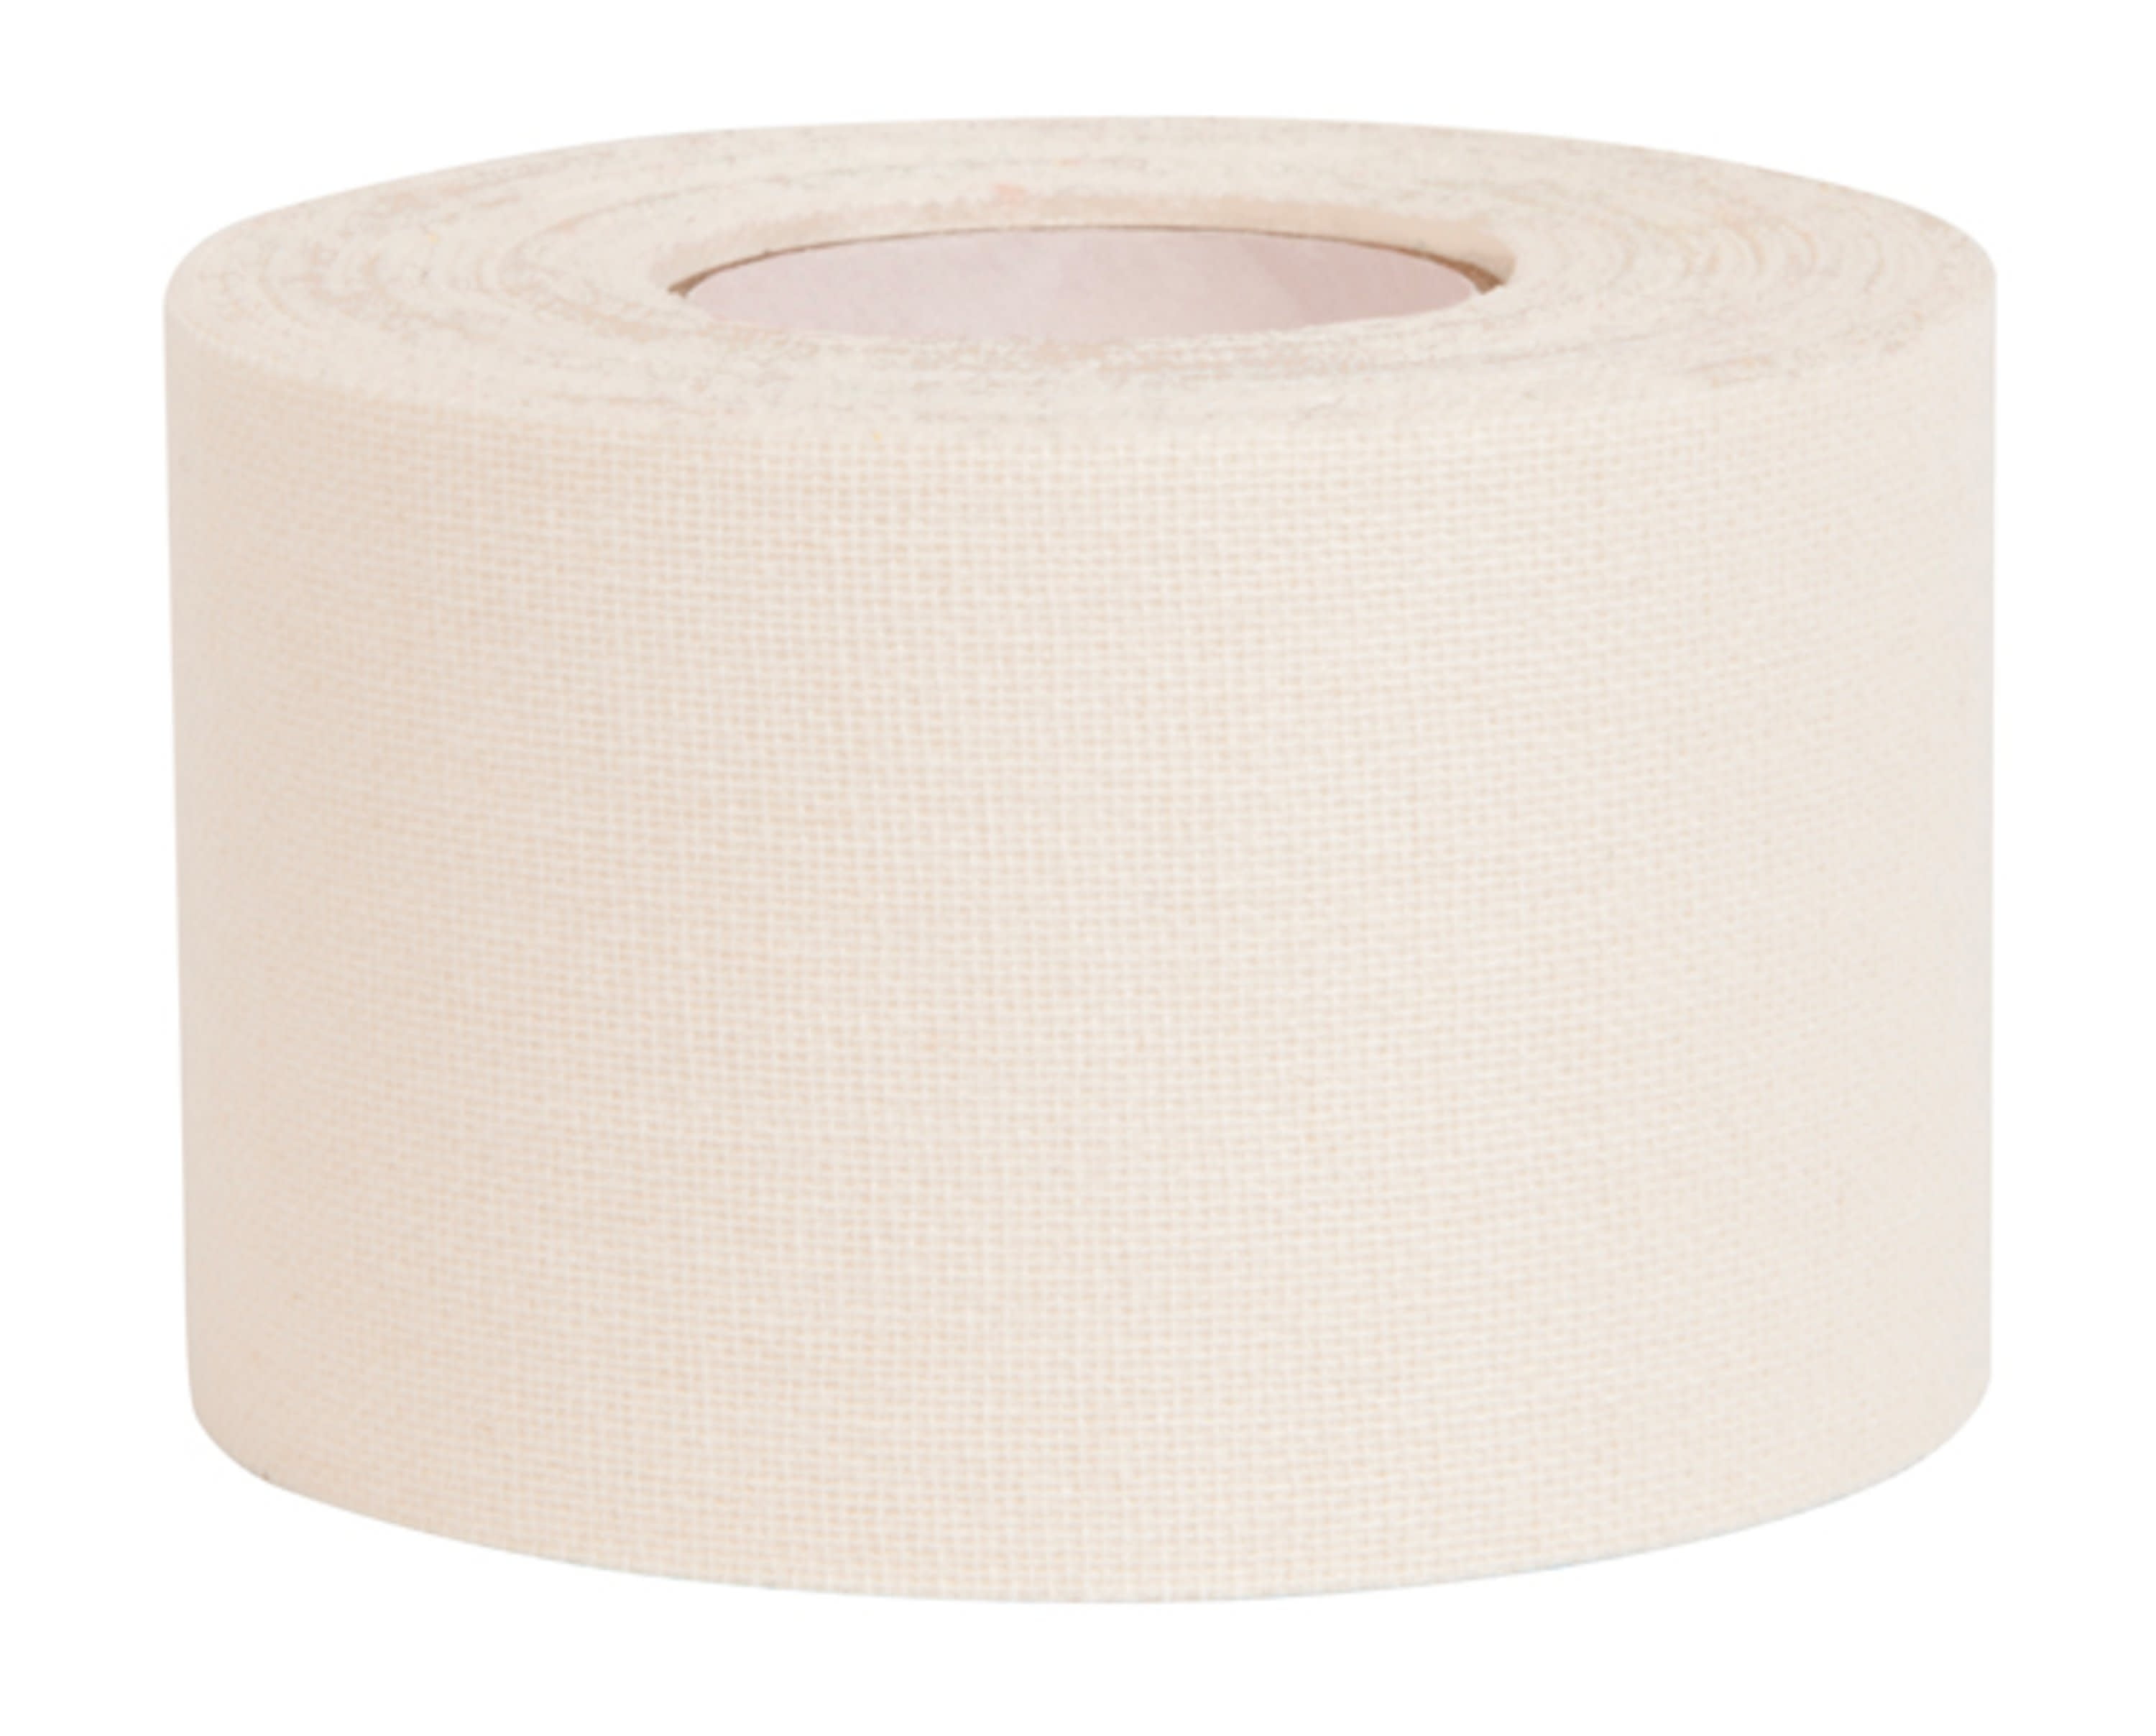 ACE Brand Sports Tape, Firm, Supportive Comfort, White, 1.5" x 10 Yds., 1 Roll